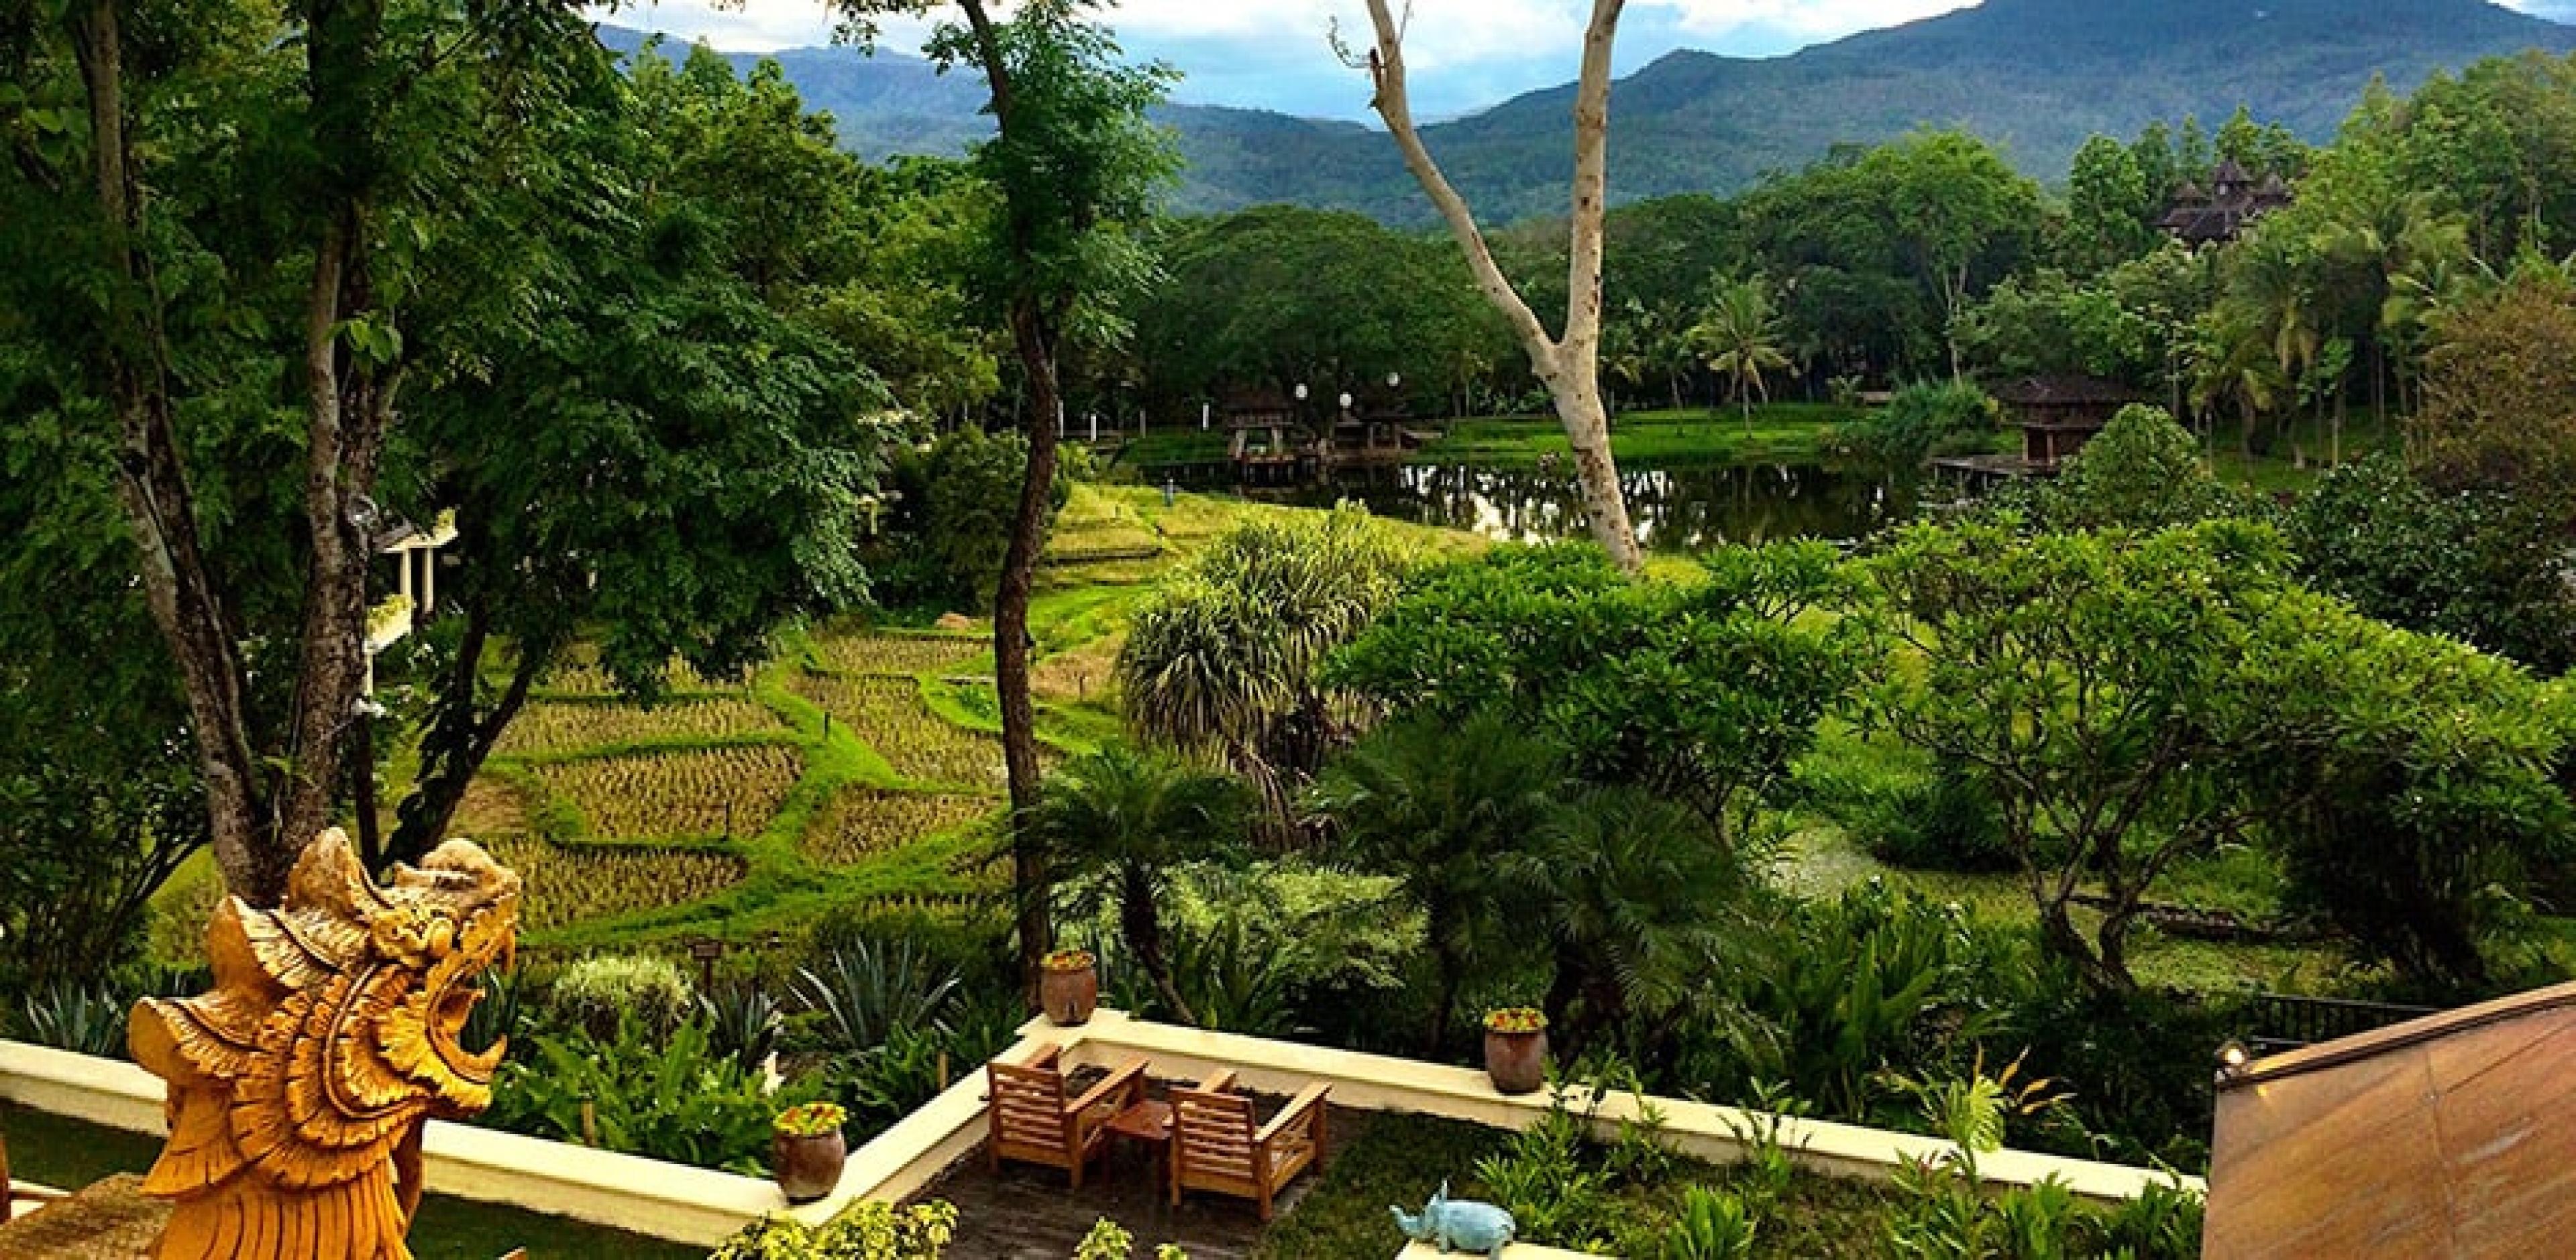 View from the Four Seasons Chiang Mai, Thailand